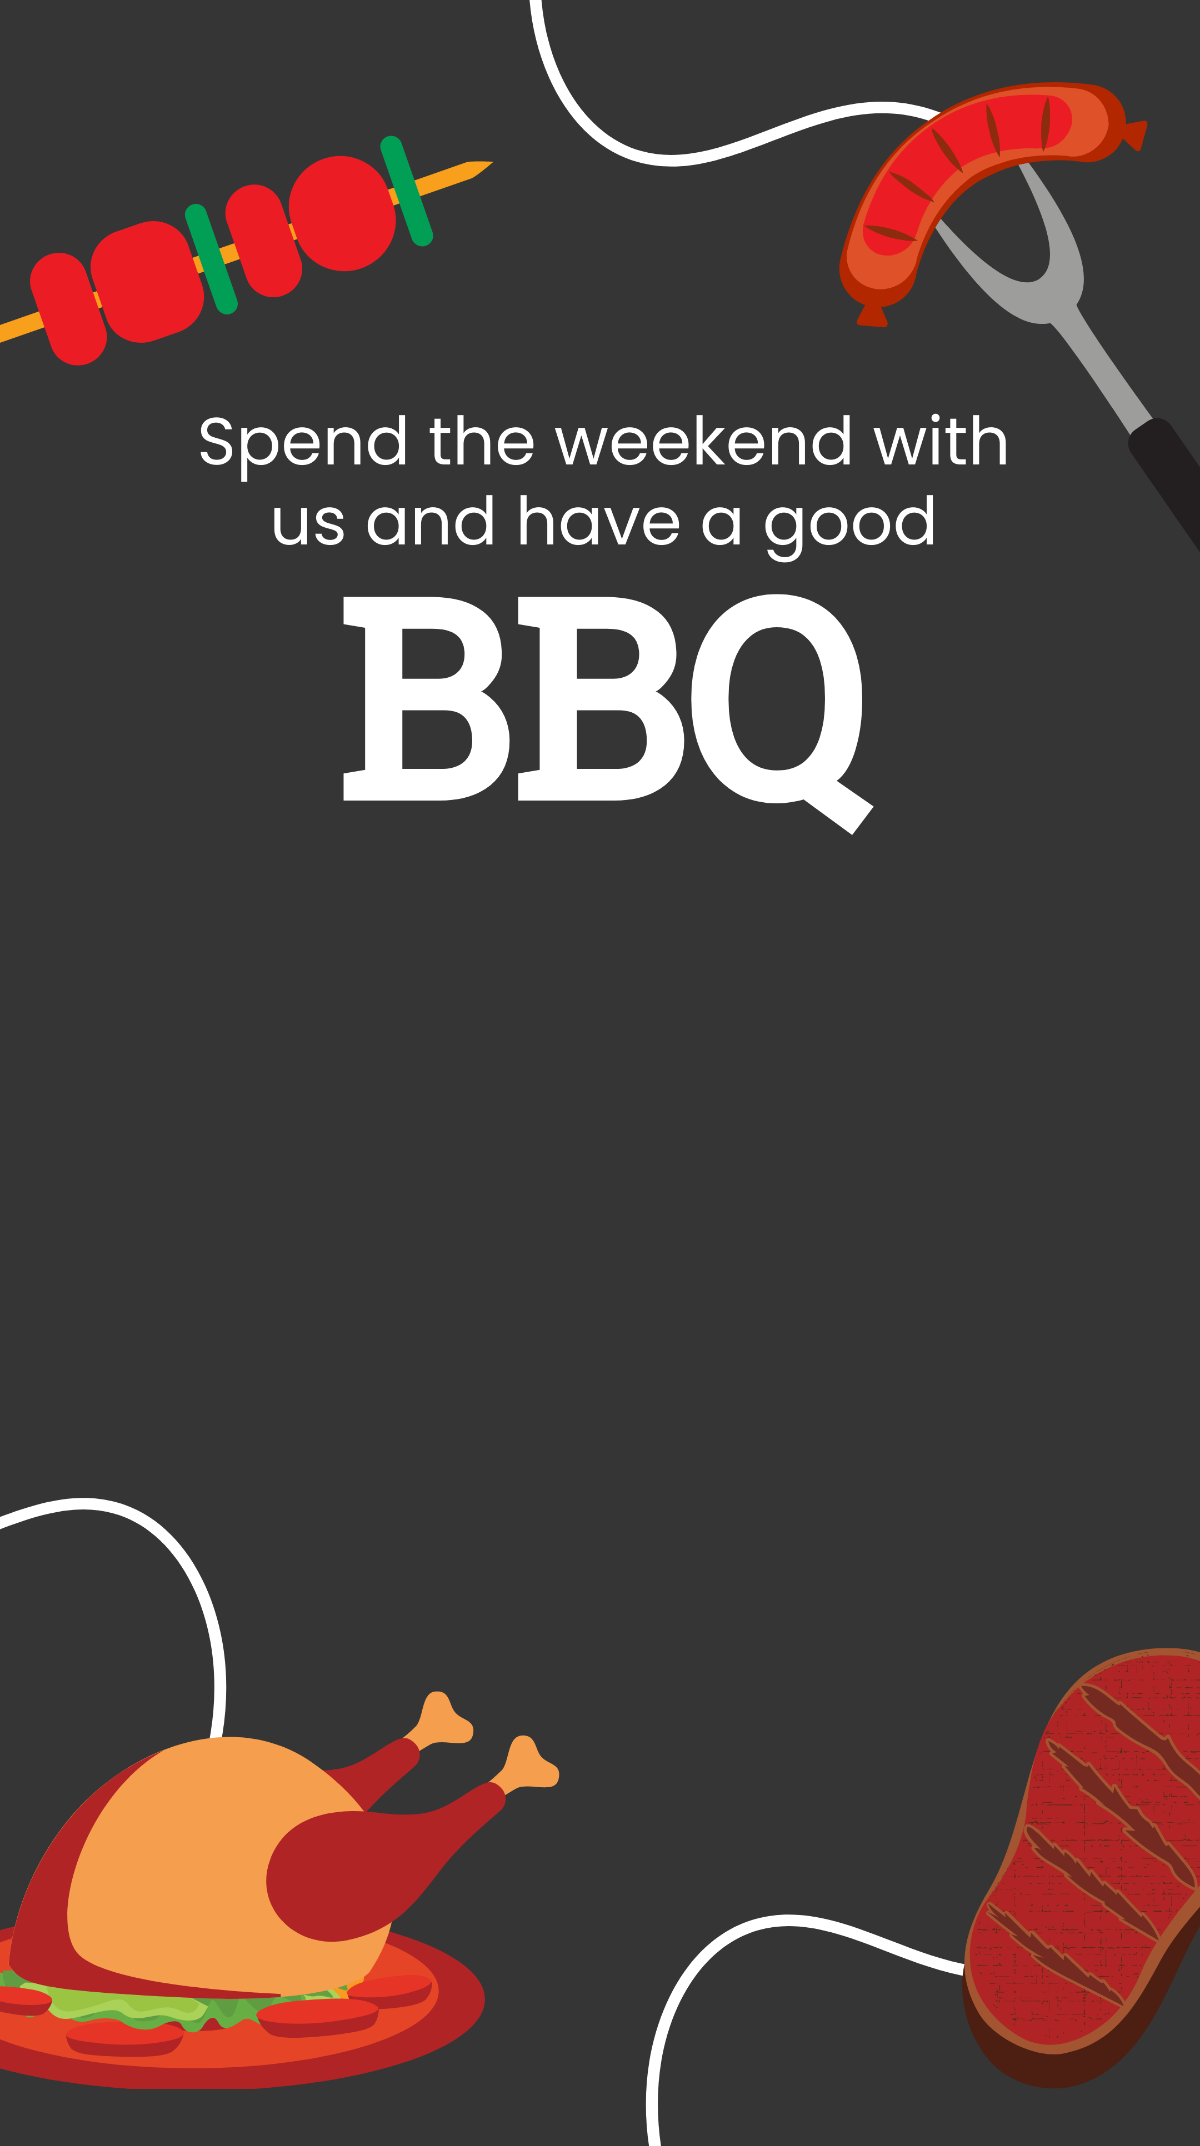 Free Weekend Bbq Snapchat Geofilter Template